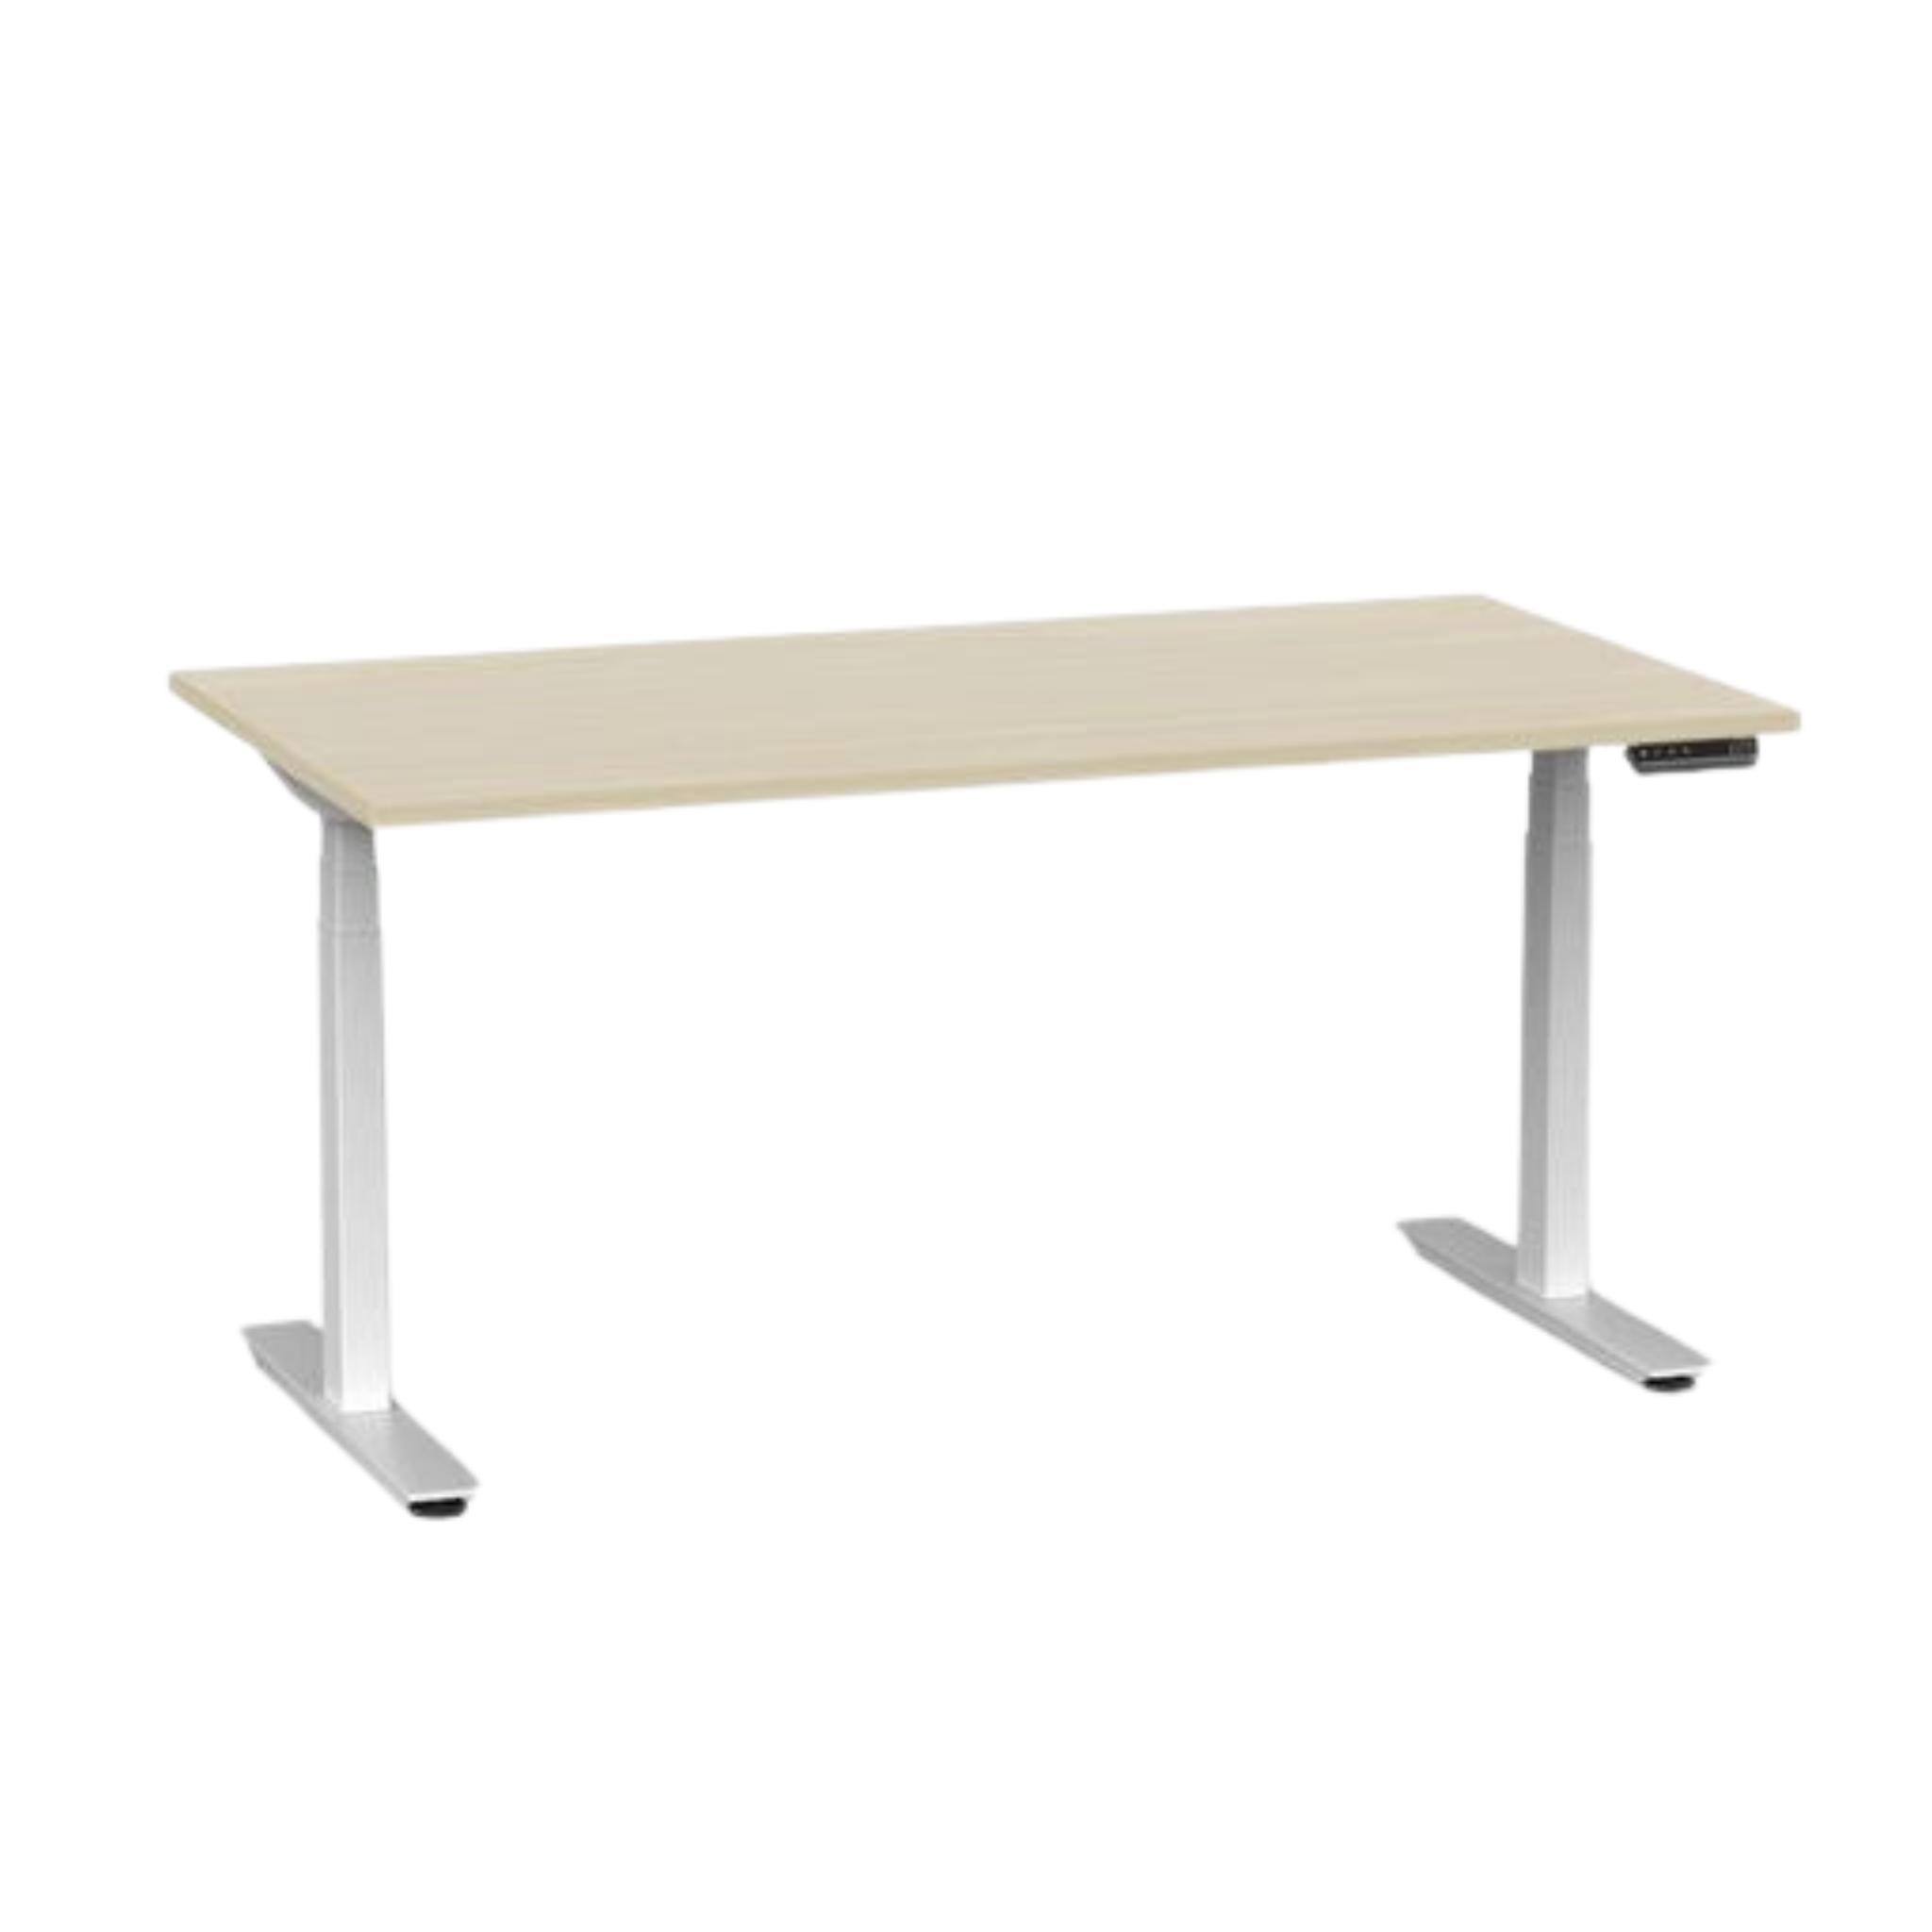 Agile Pro electric sit to stand desk with white frame and nordic maple top